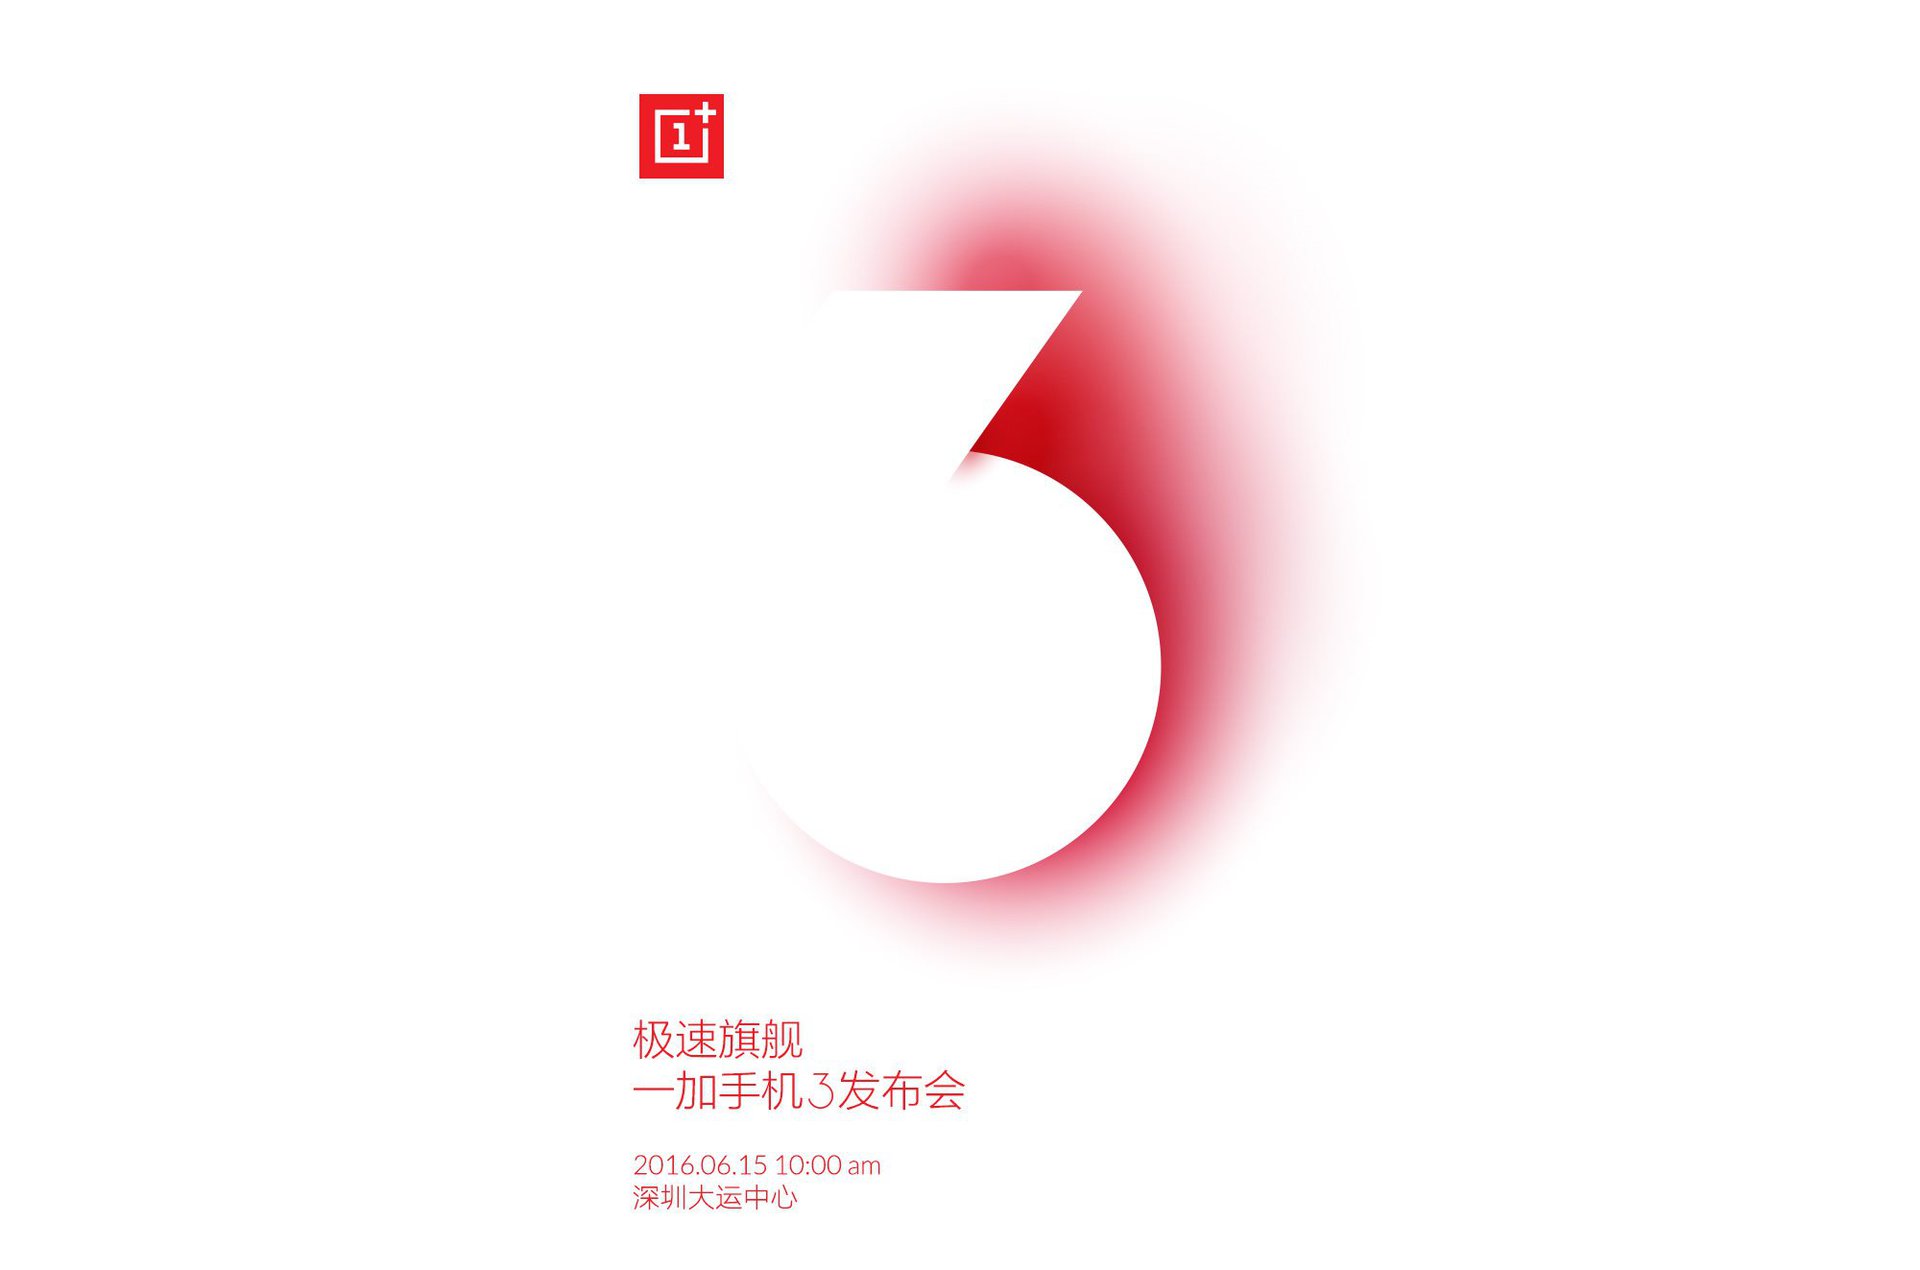 oneplus 3 launch event